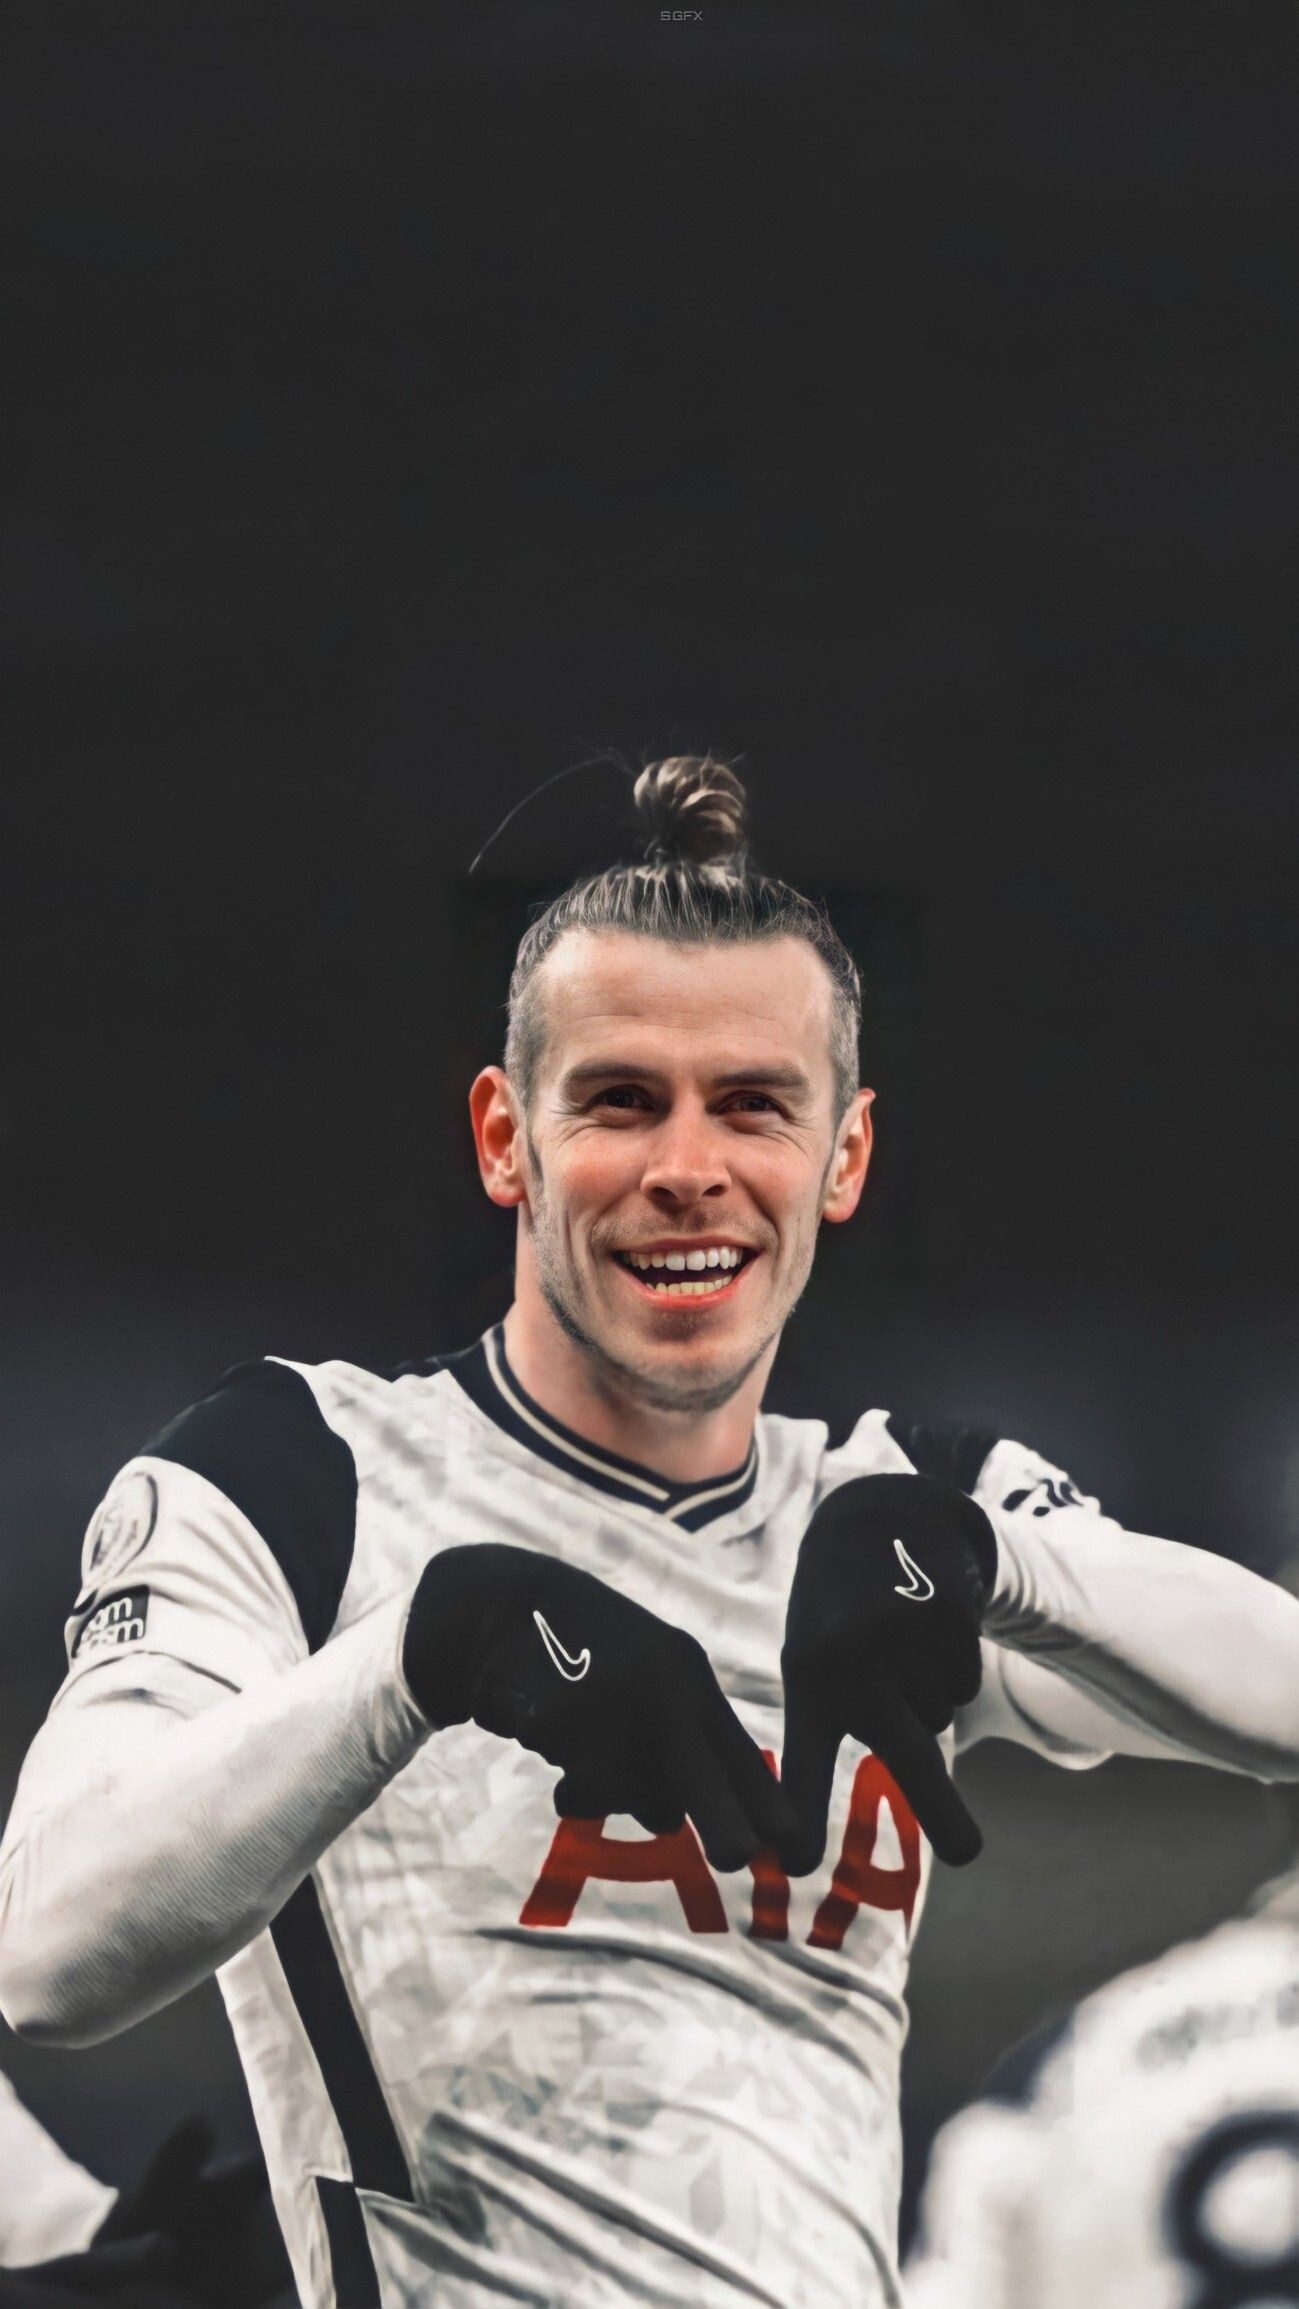 Gareth Bale: Tottenham Hotspur training session, One of the greatest Welsh players of all time. 1300x2310 HD Wallpaper.